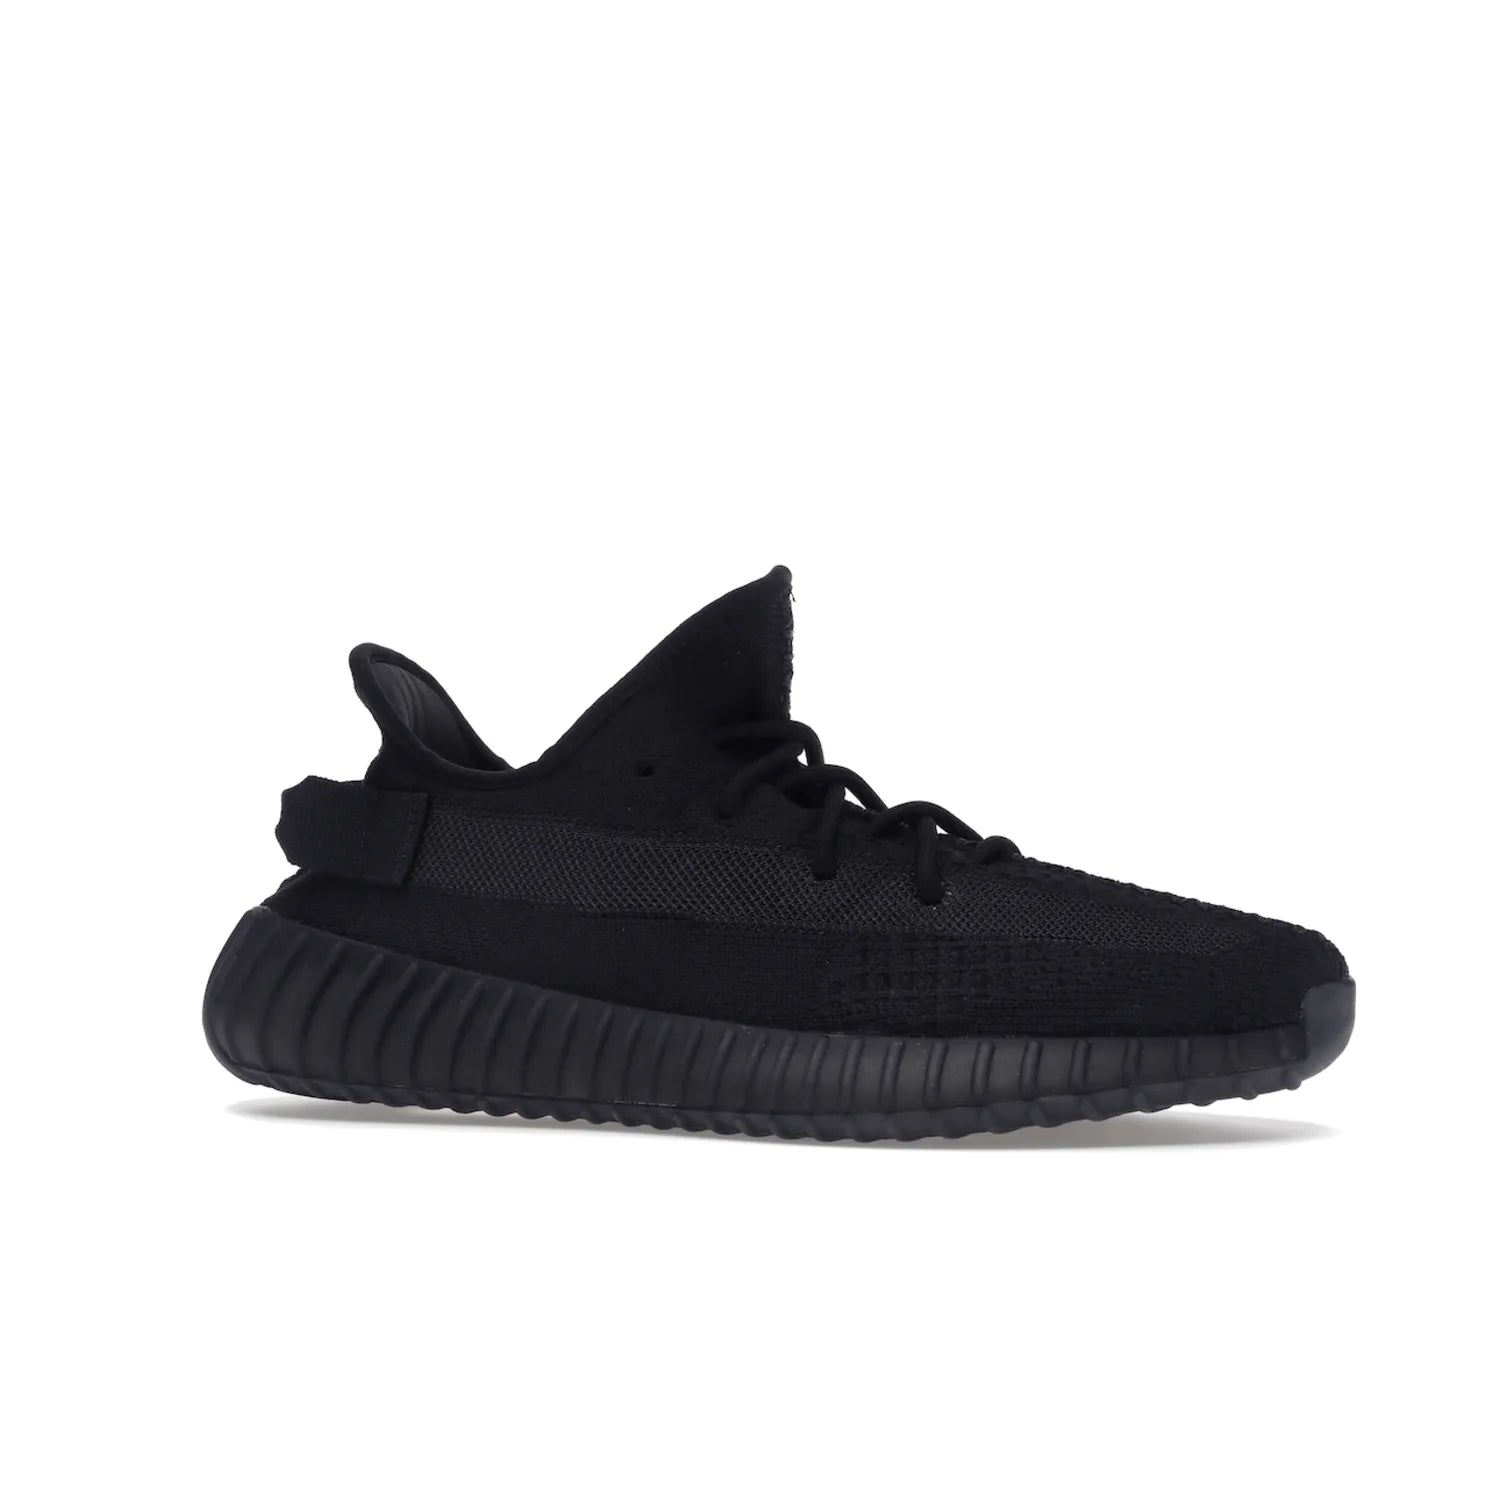 adidas Yeezy Boost 350 V2 Onyx - Image 3 - Only at www.BallersClubKickz.com - Adidas Yeezy Boost 350 V2 Onyx Triple Black shoes for comfort and style. Arriving Spring 2022.